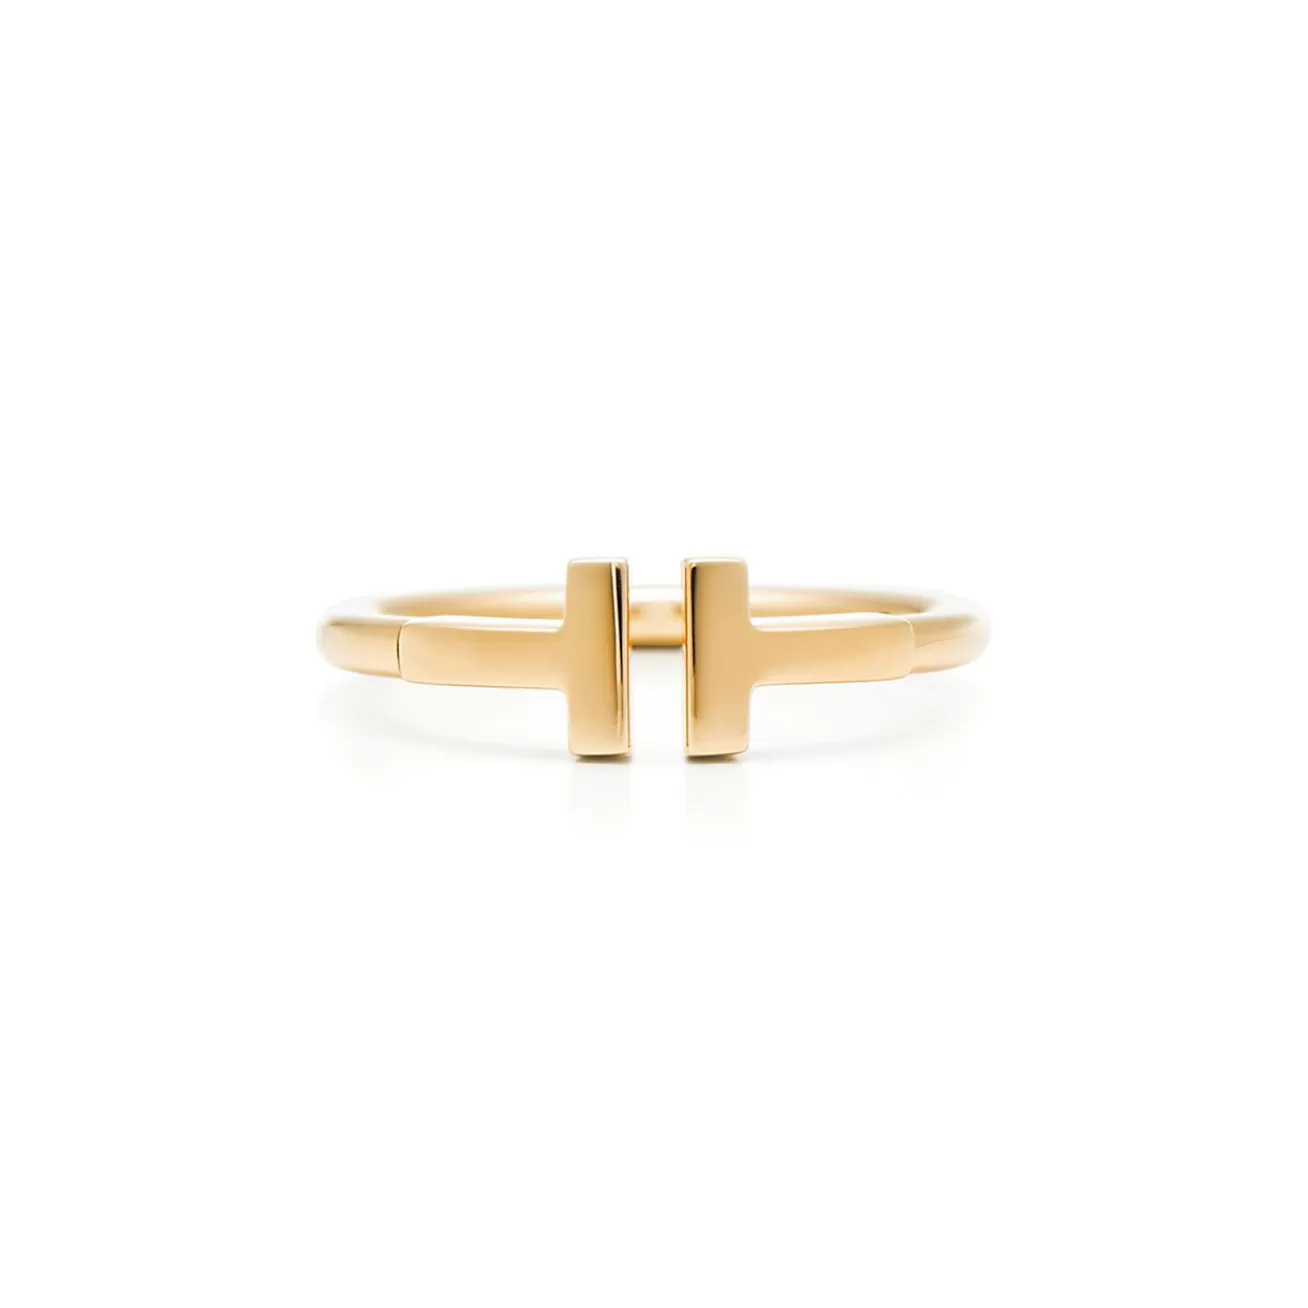 Tiffany & Co. Tiffany T wire ring in 18k gold. | ^ Rings | Men's Jewelry